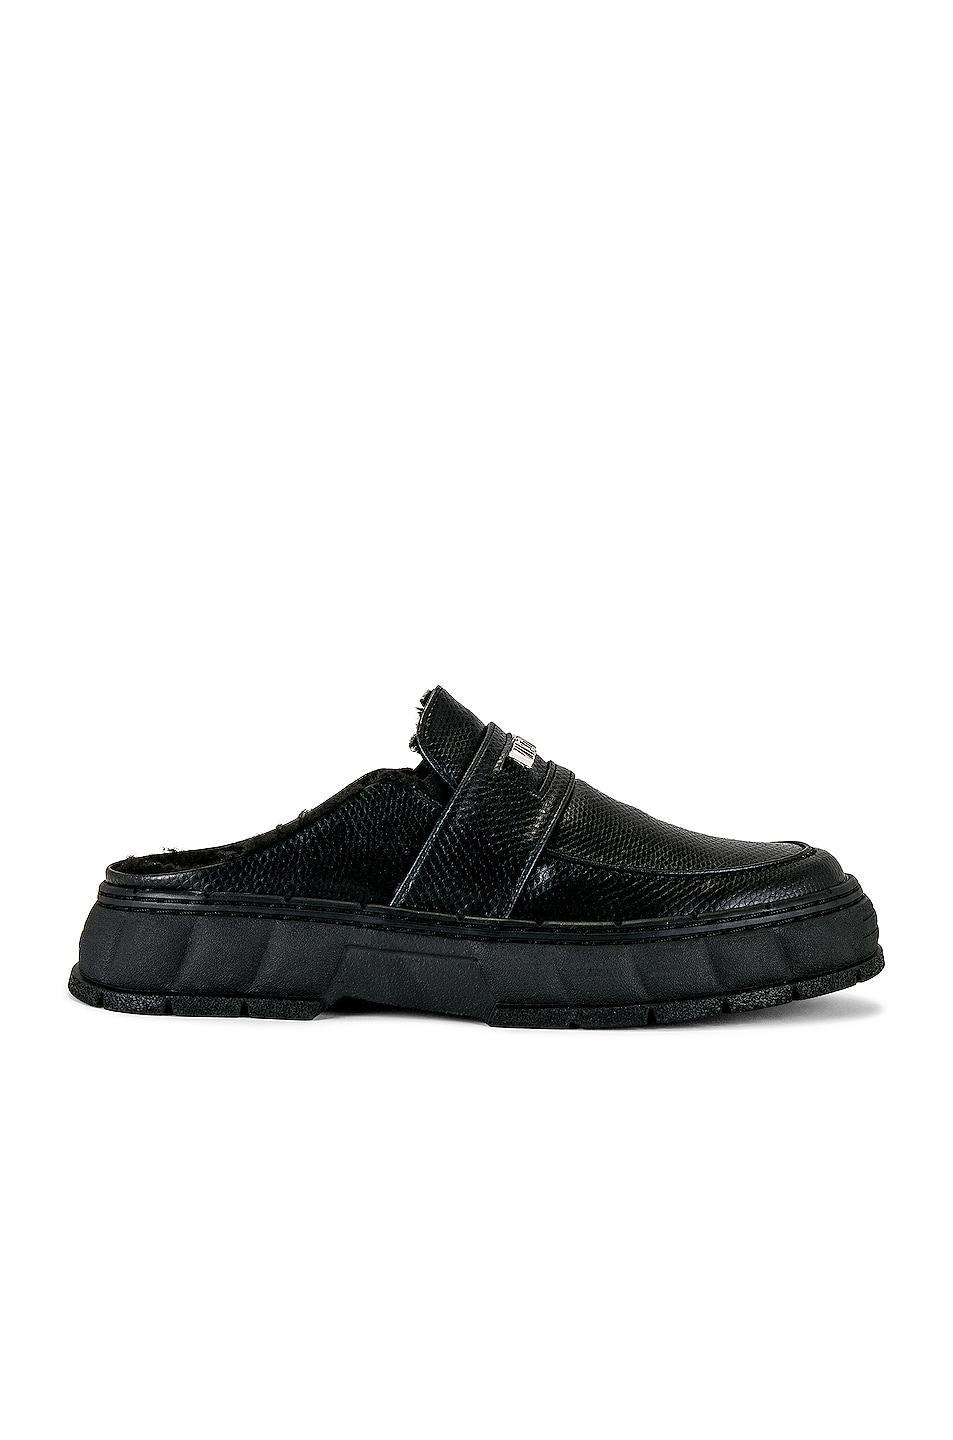 Viron Loafer in Black Product Image